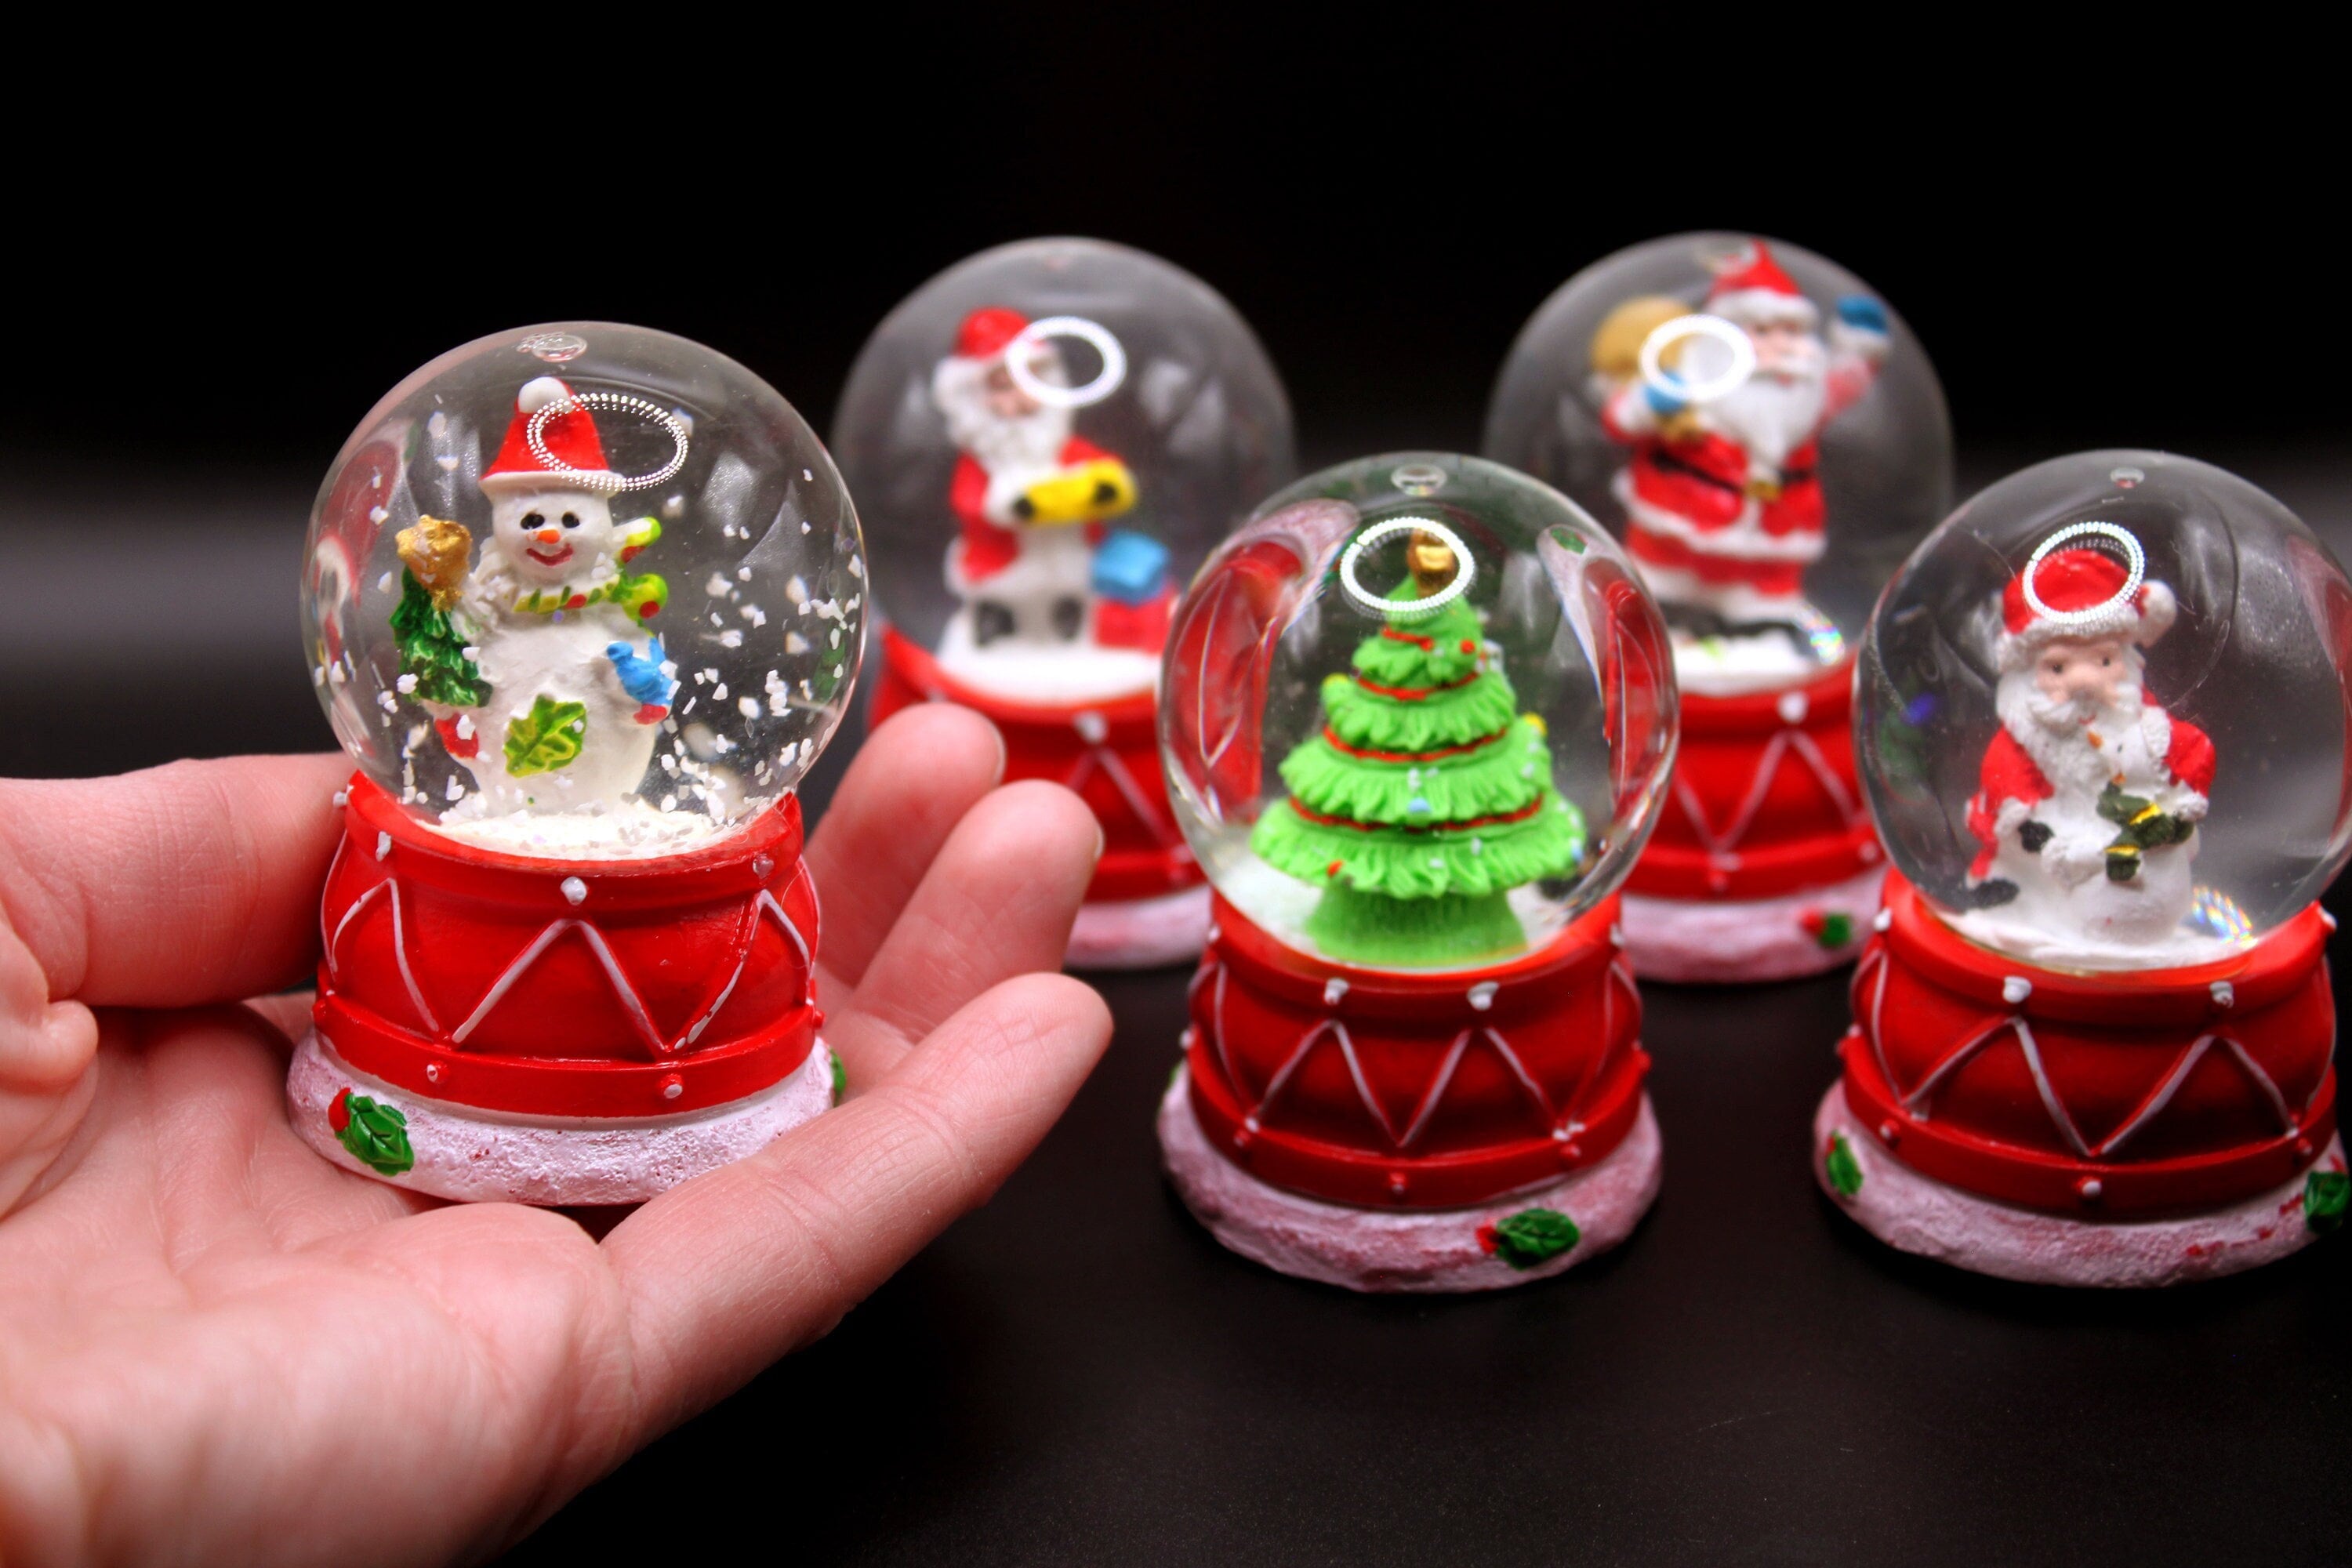 How to Buy Materials to Make Miniature Snow Globes